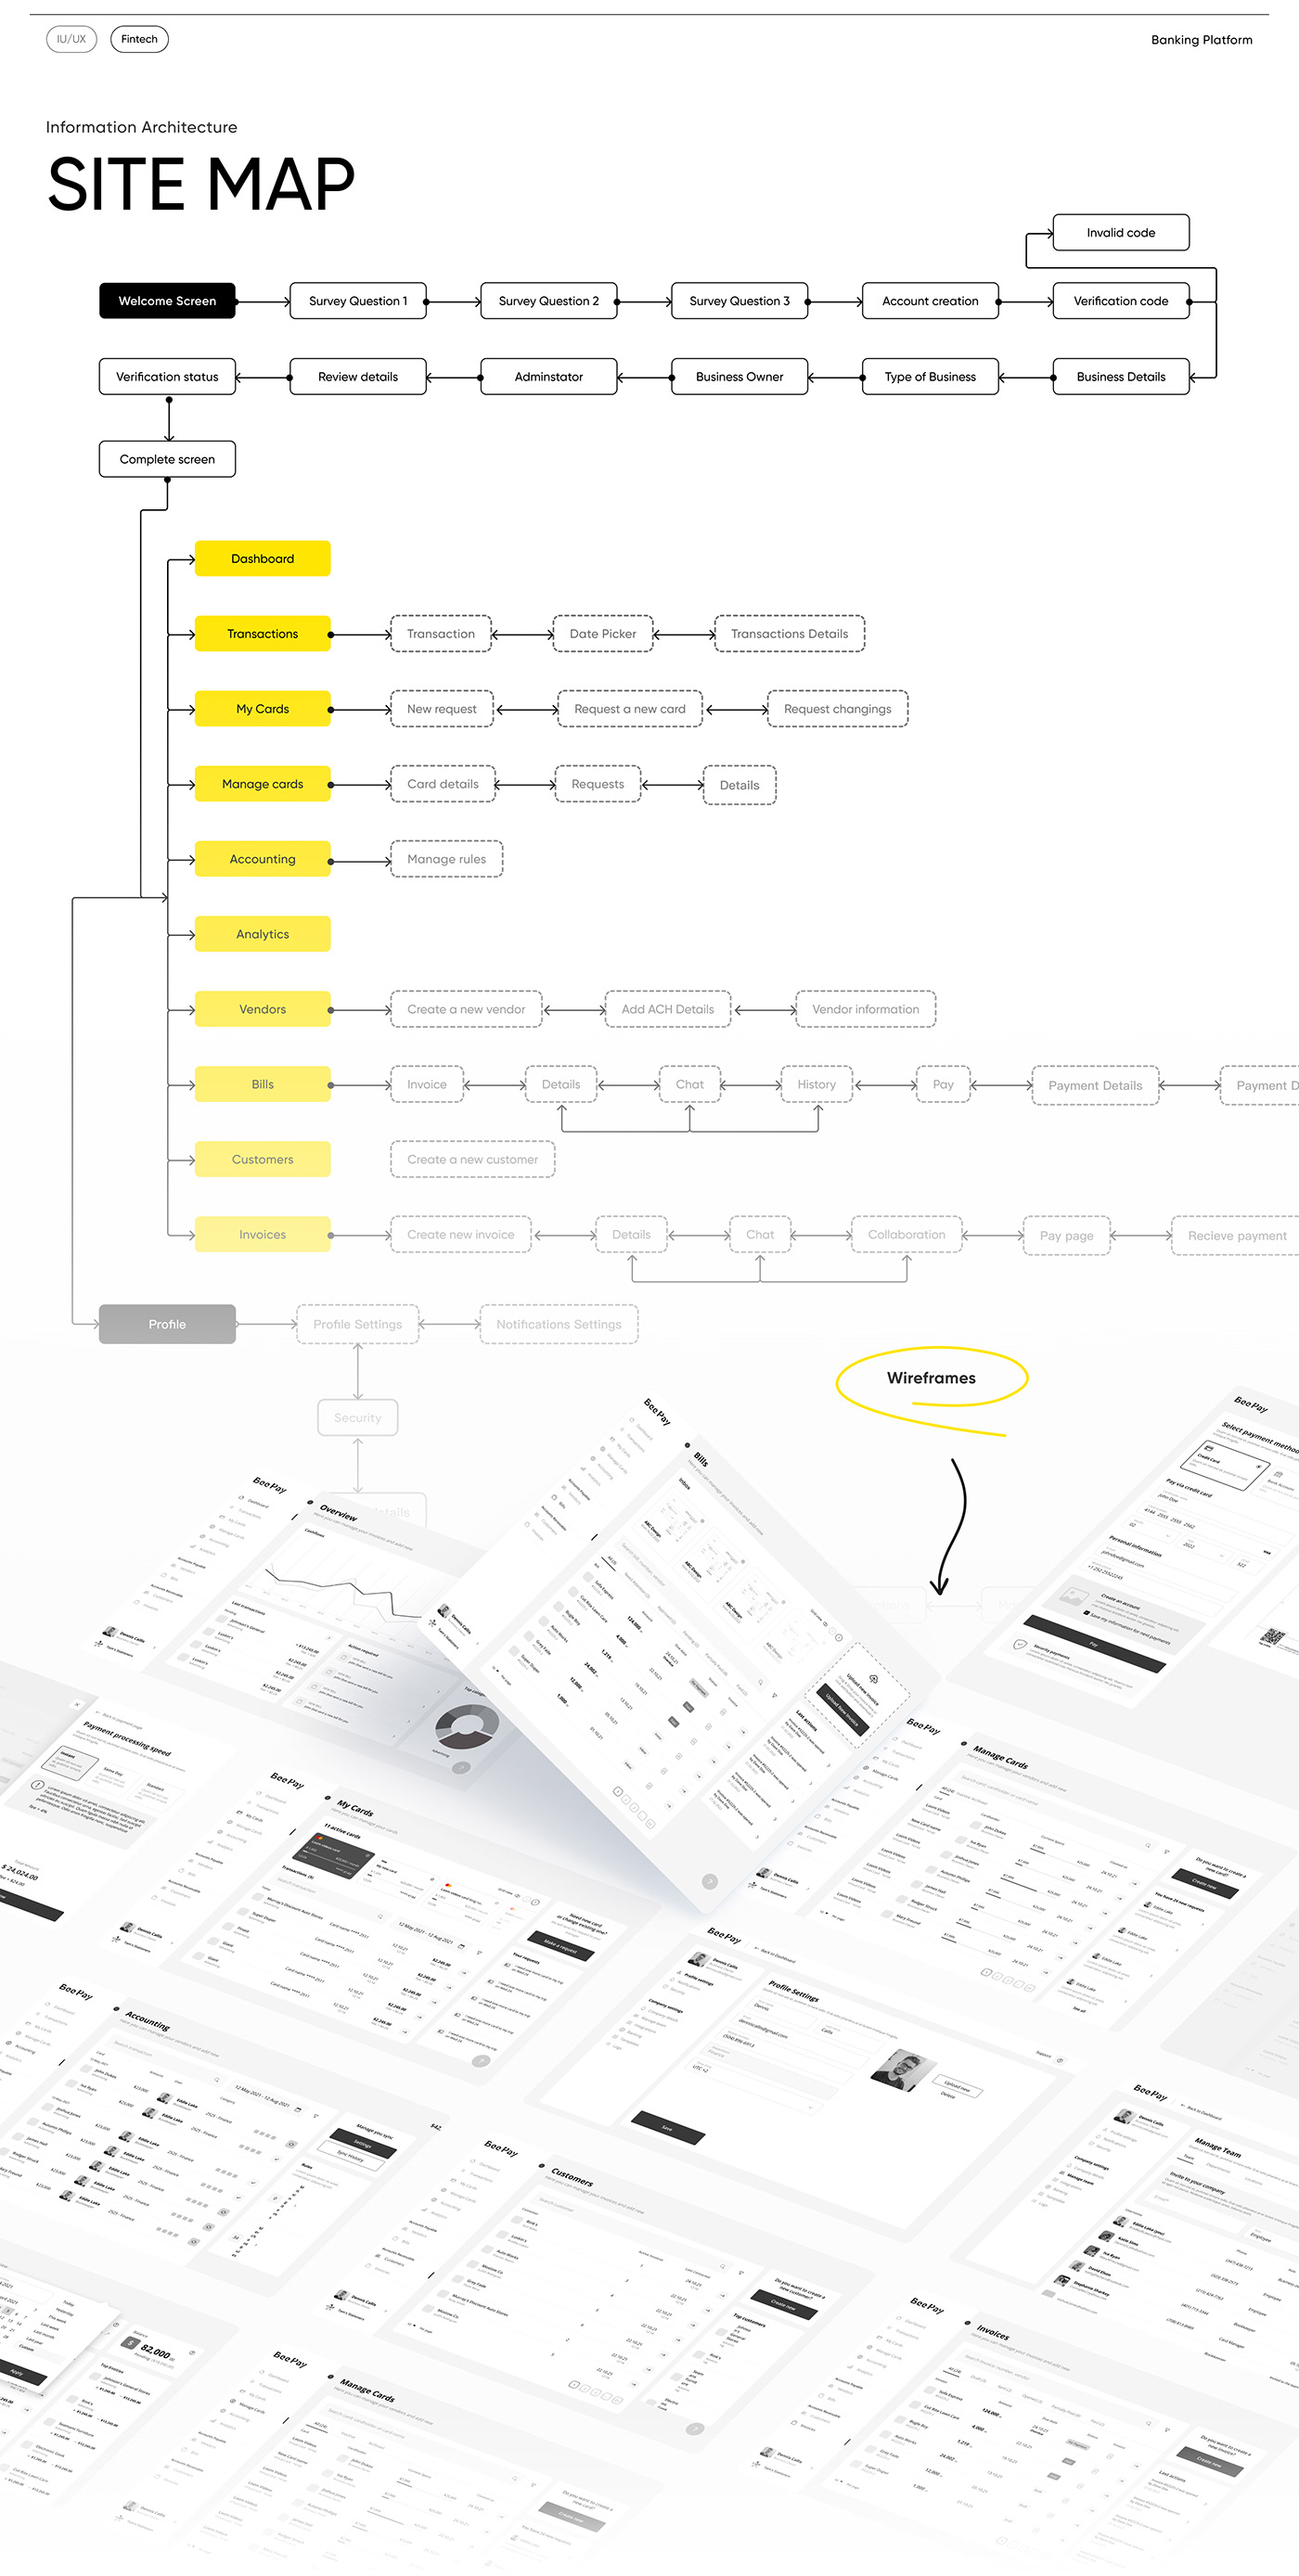 Site Map and Wireframes